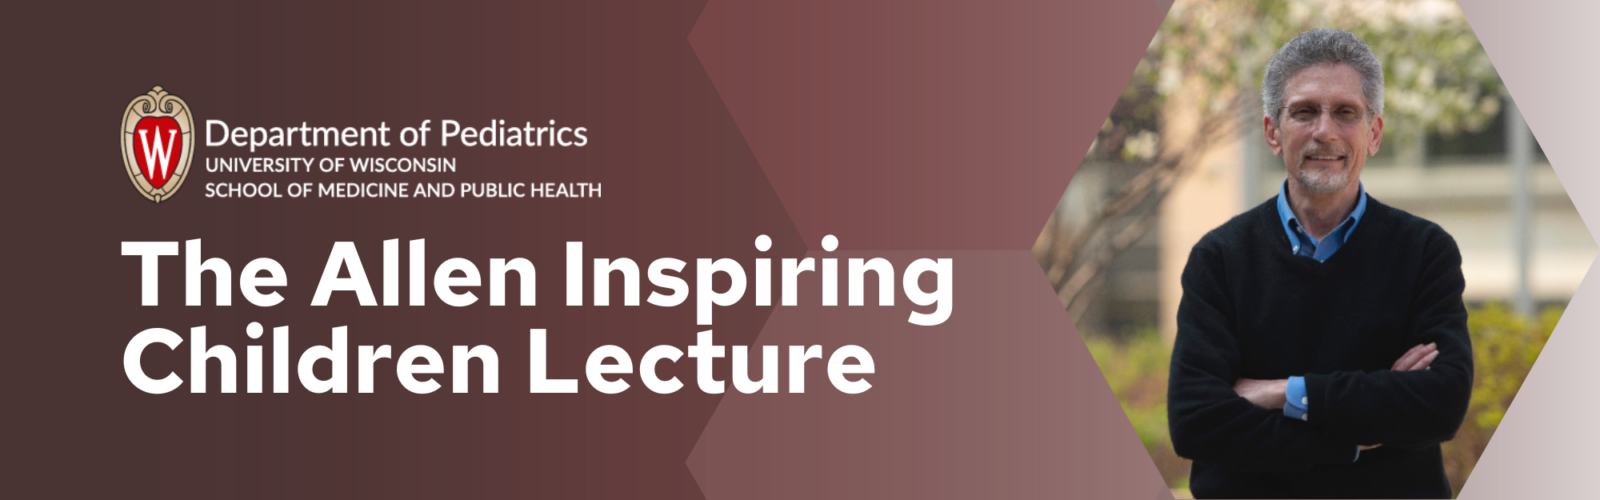 Department of Pediatrics. University of Wisconsin School of Medicine and Public Health. The Allen Inspiring Children Lecture. Maroon and mauve background with hexagons.